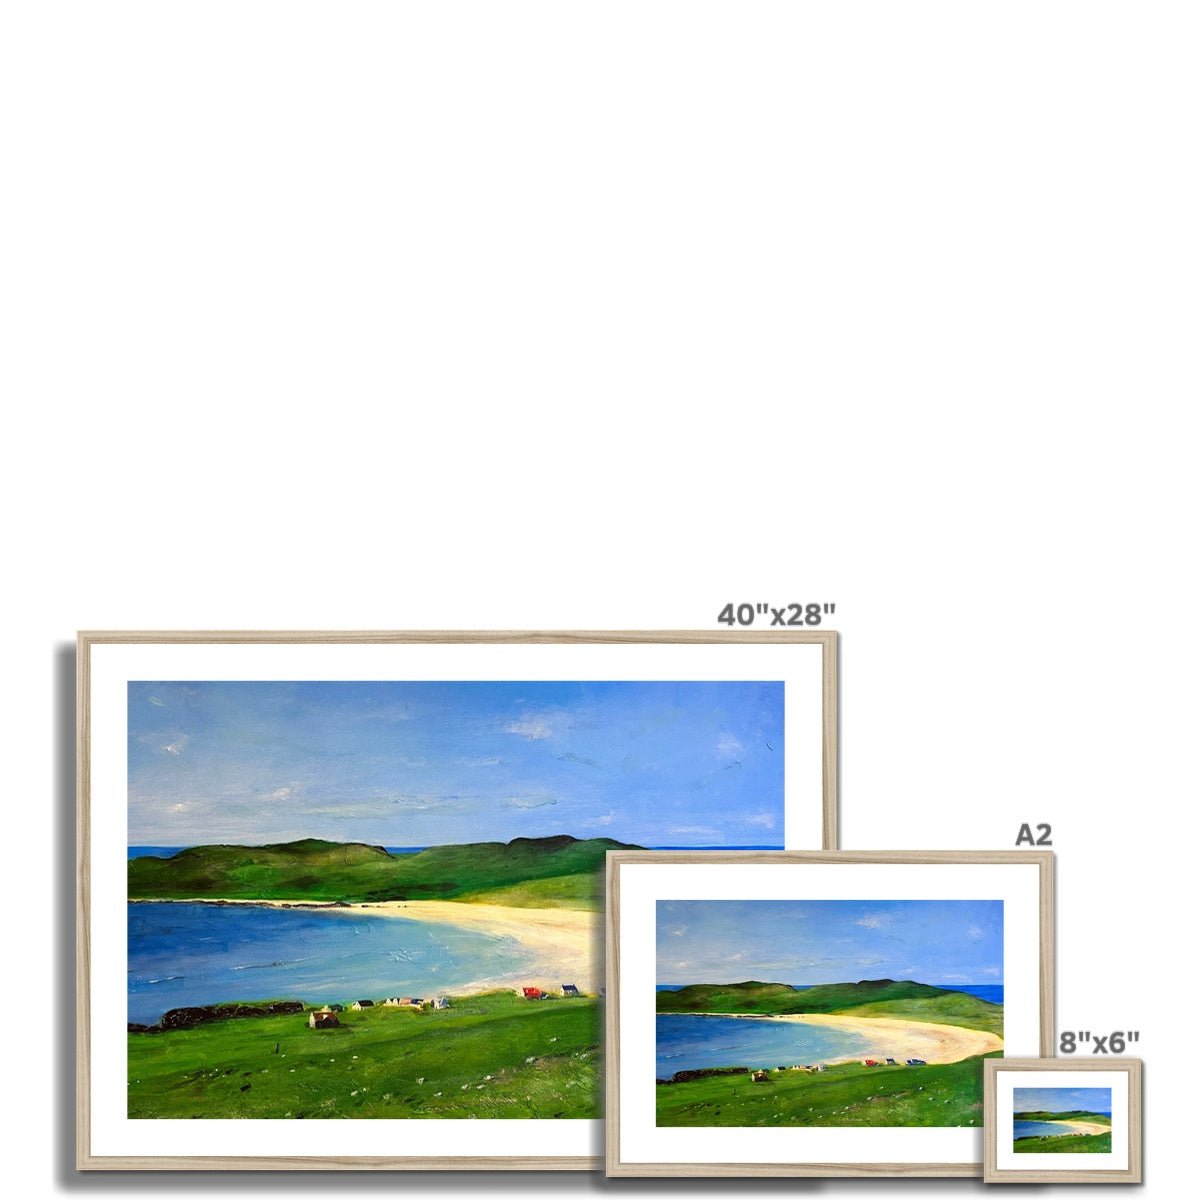 Balephuil Beach Tiree Painting | Framed & Mounted Prints From Scotland-Framed & Mounted Prints-Hebridean Islands Art Gallery-Paintings, Prints, Homeware, Art Gifts From Scotland By Scottish Artist Kevin Hunter